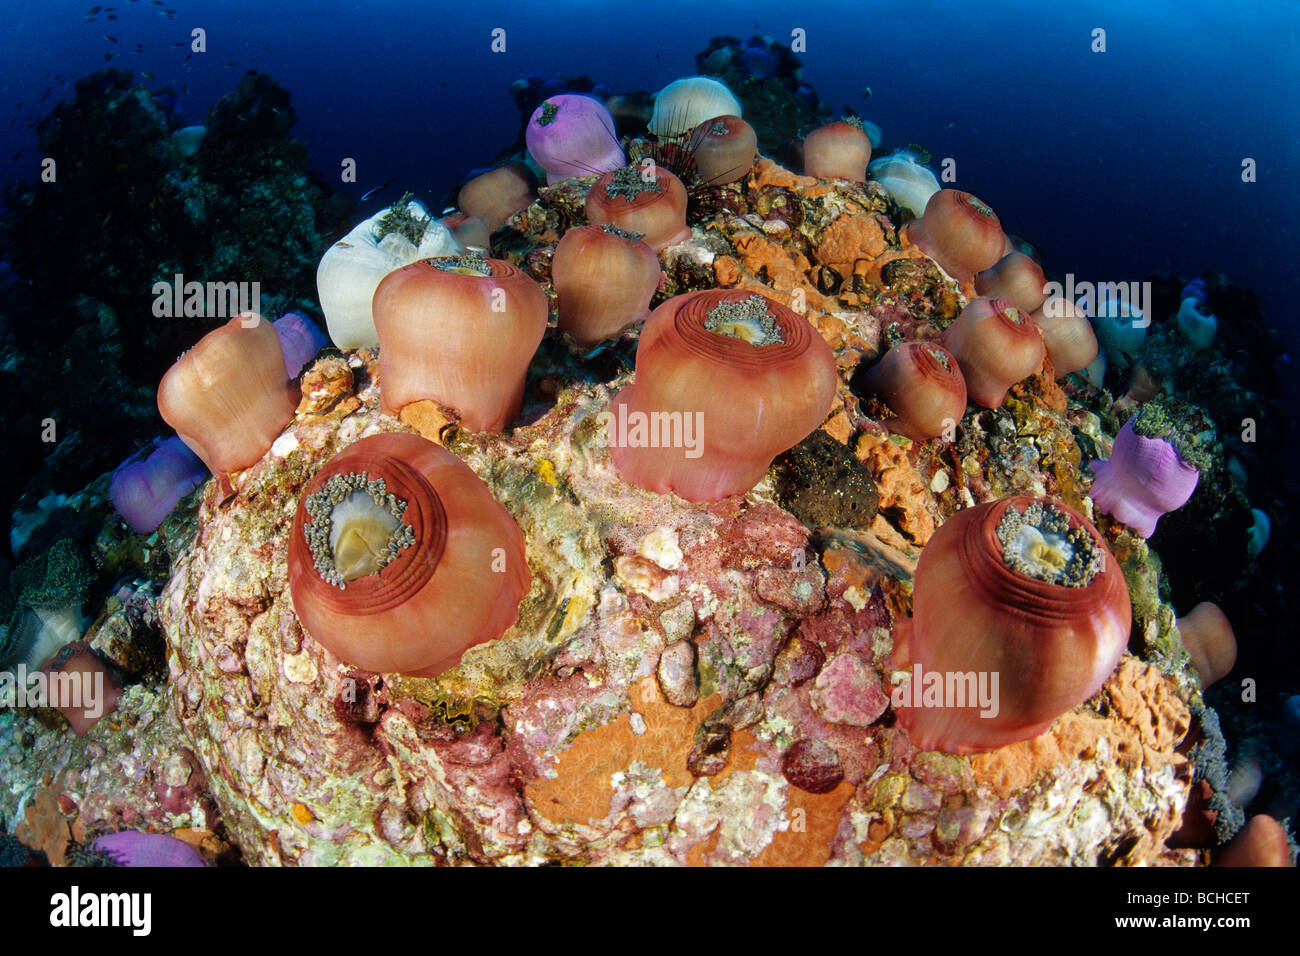 Collection of Magnificent Anemone Heteractis magnifica Similan Islands Andaman Sea Thailand Stock Photo